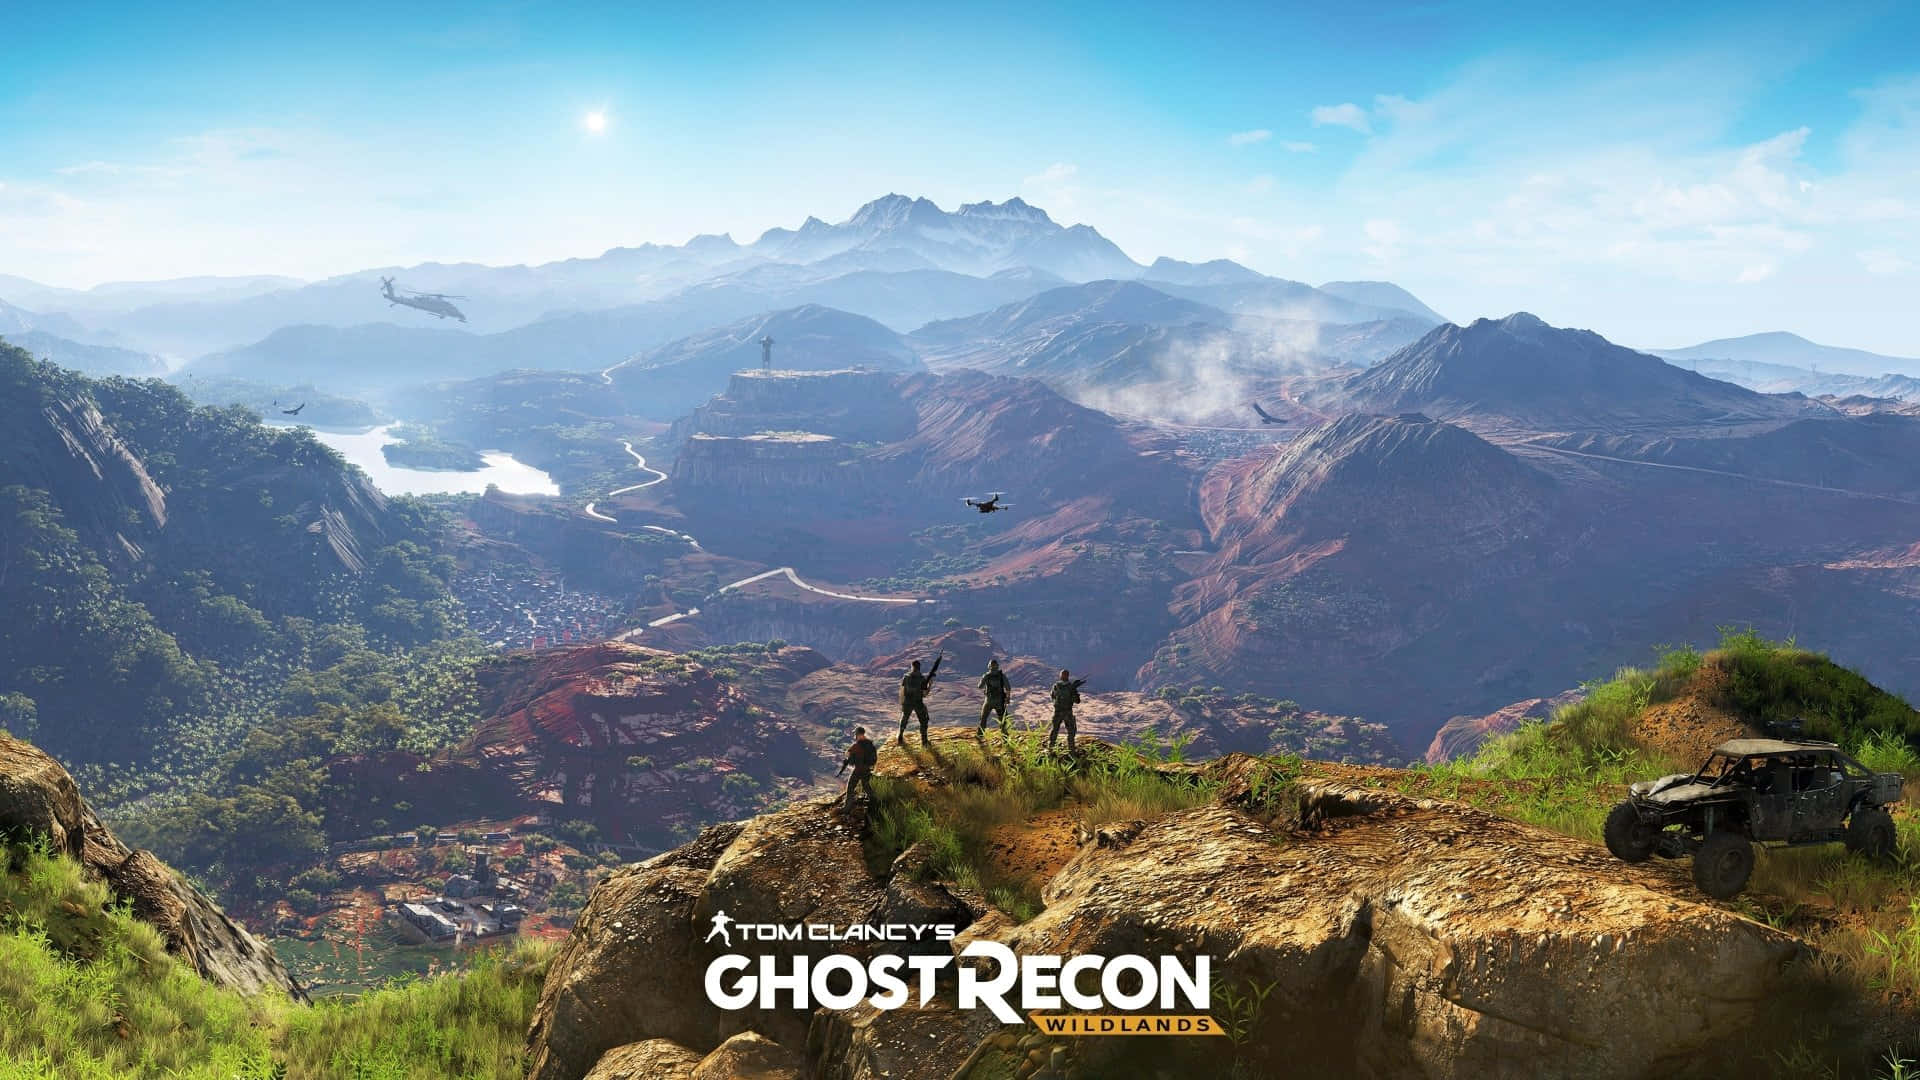 Mountains Scenery Ghost Recon Wildlands Background 1920 x 1080 Background